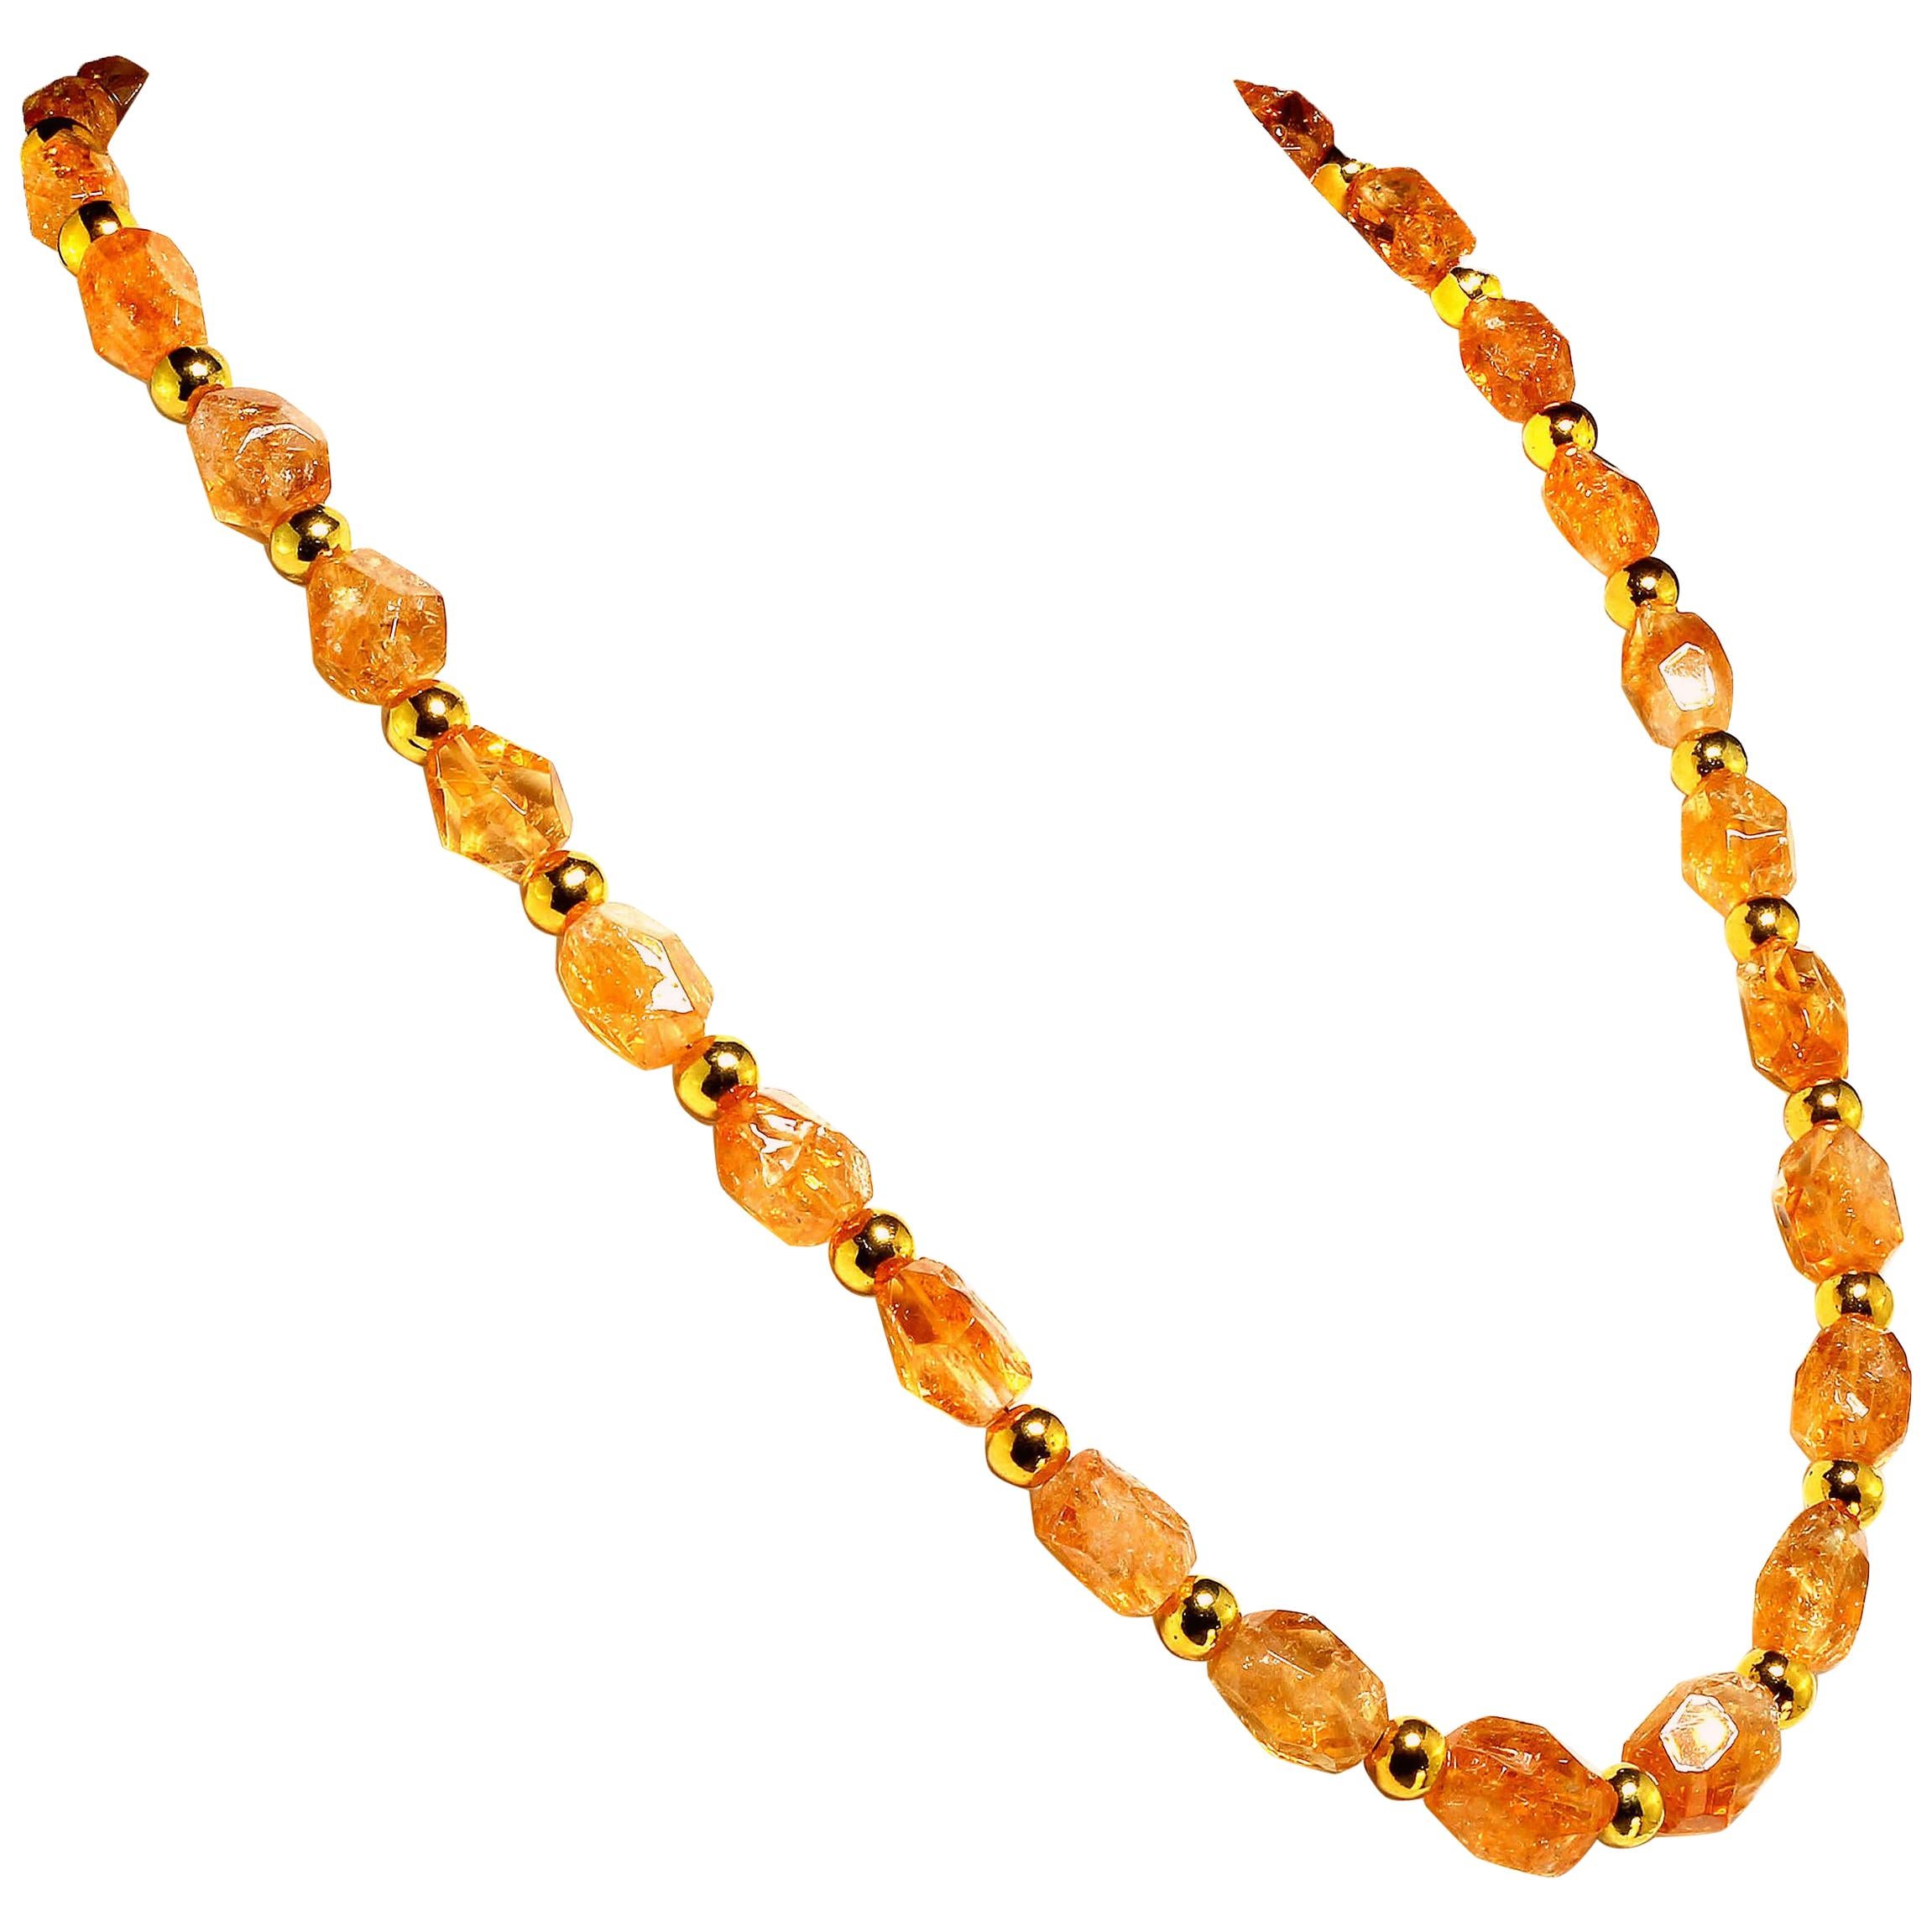 AJD 26 Inch Sparkling Chunky Citrine Nuggets with Goldy Accents Necklace